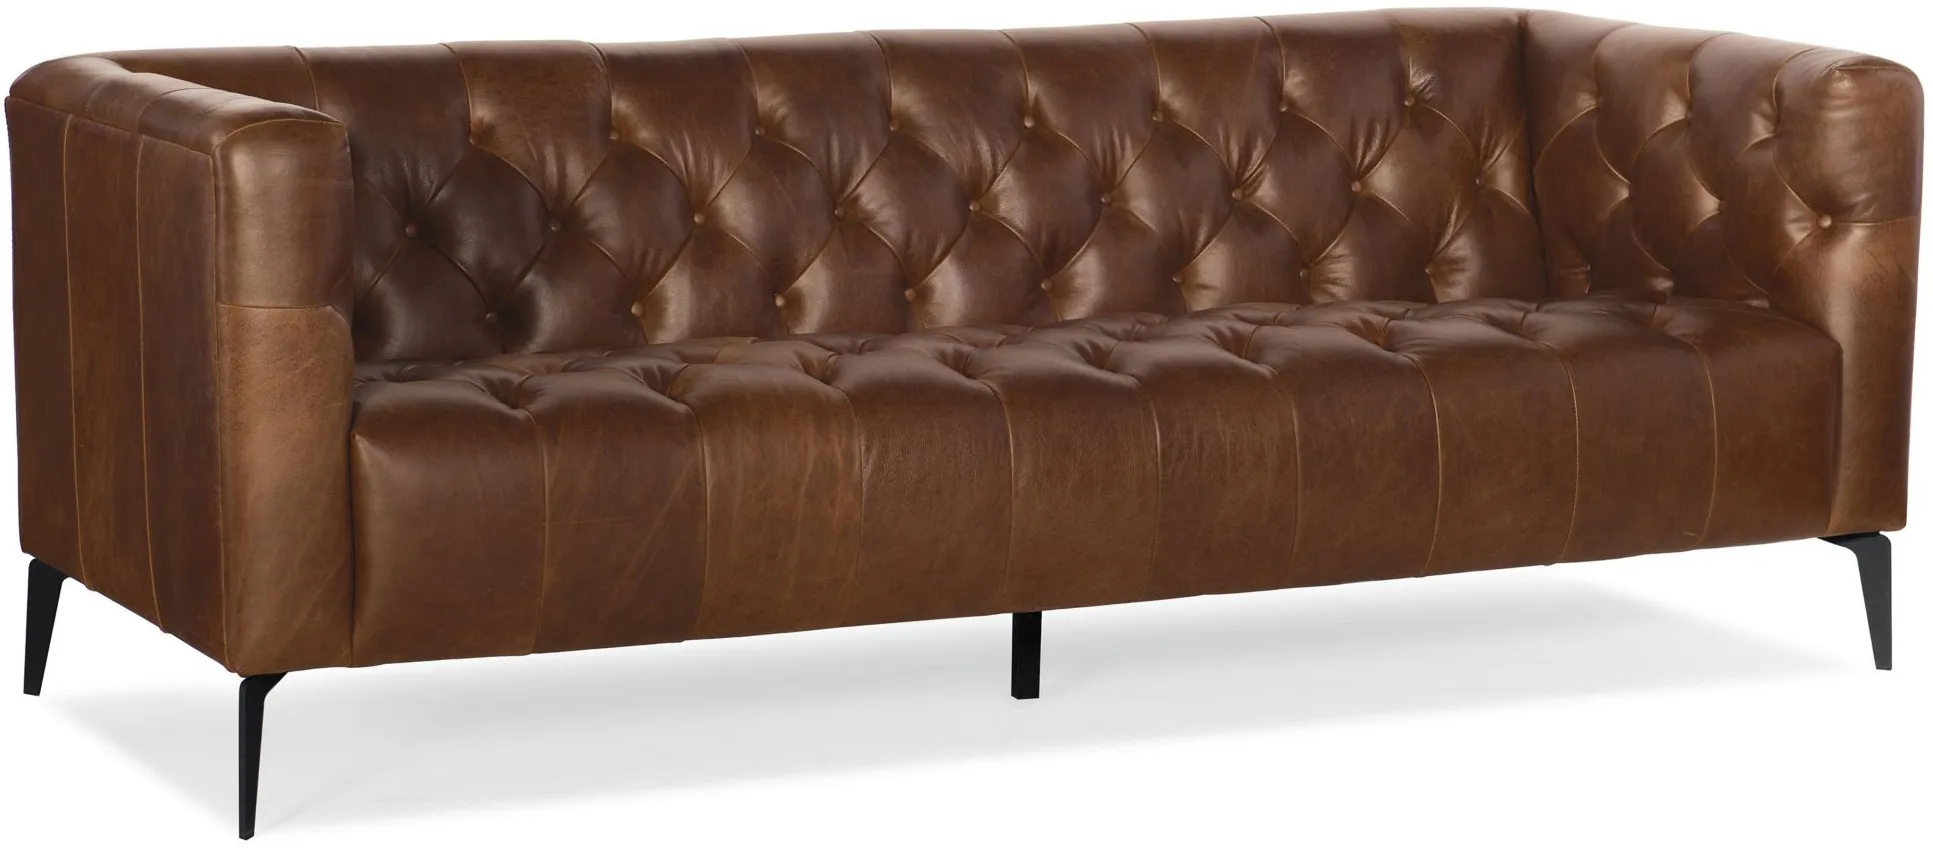 Nicolla Stationary Sofa in Brown by Hooker Furniture